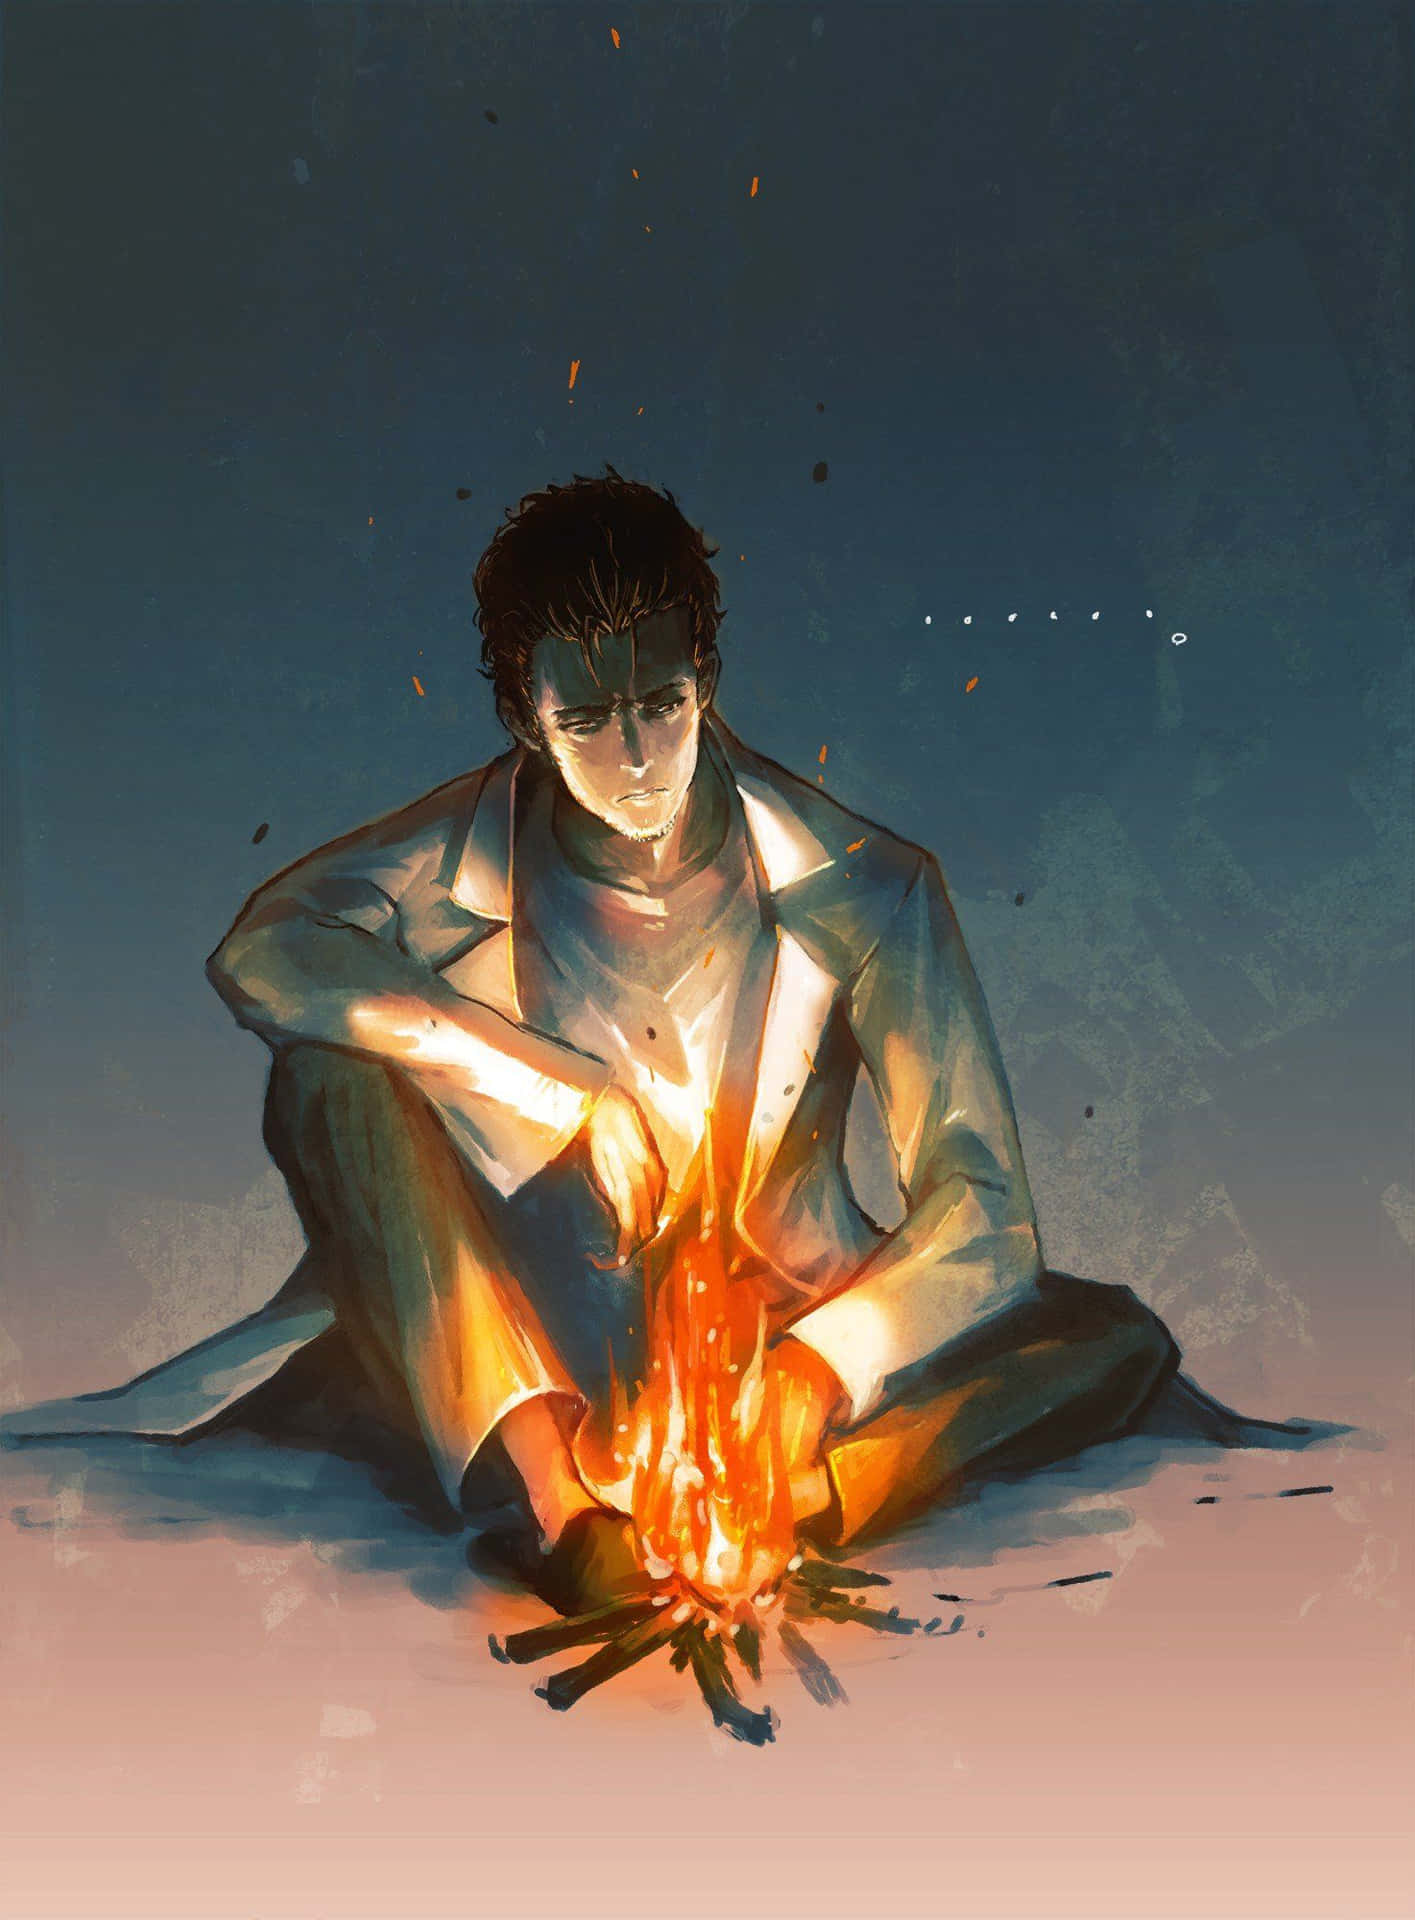 Rintaro Okabe deep in thought in his laboratory Wallpaper